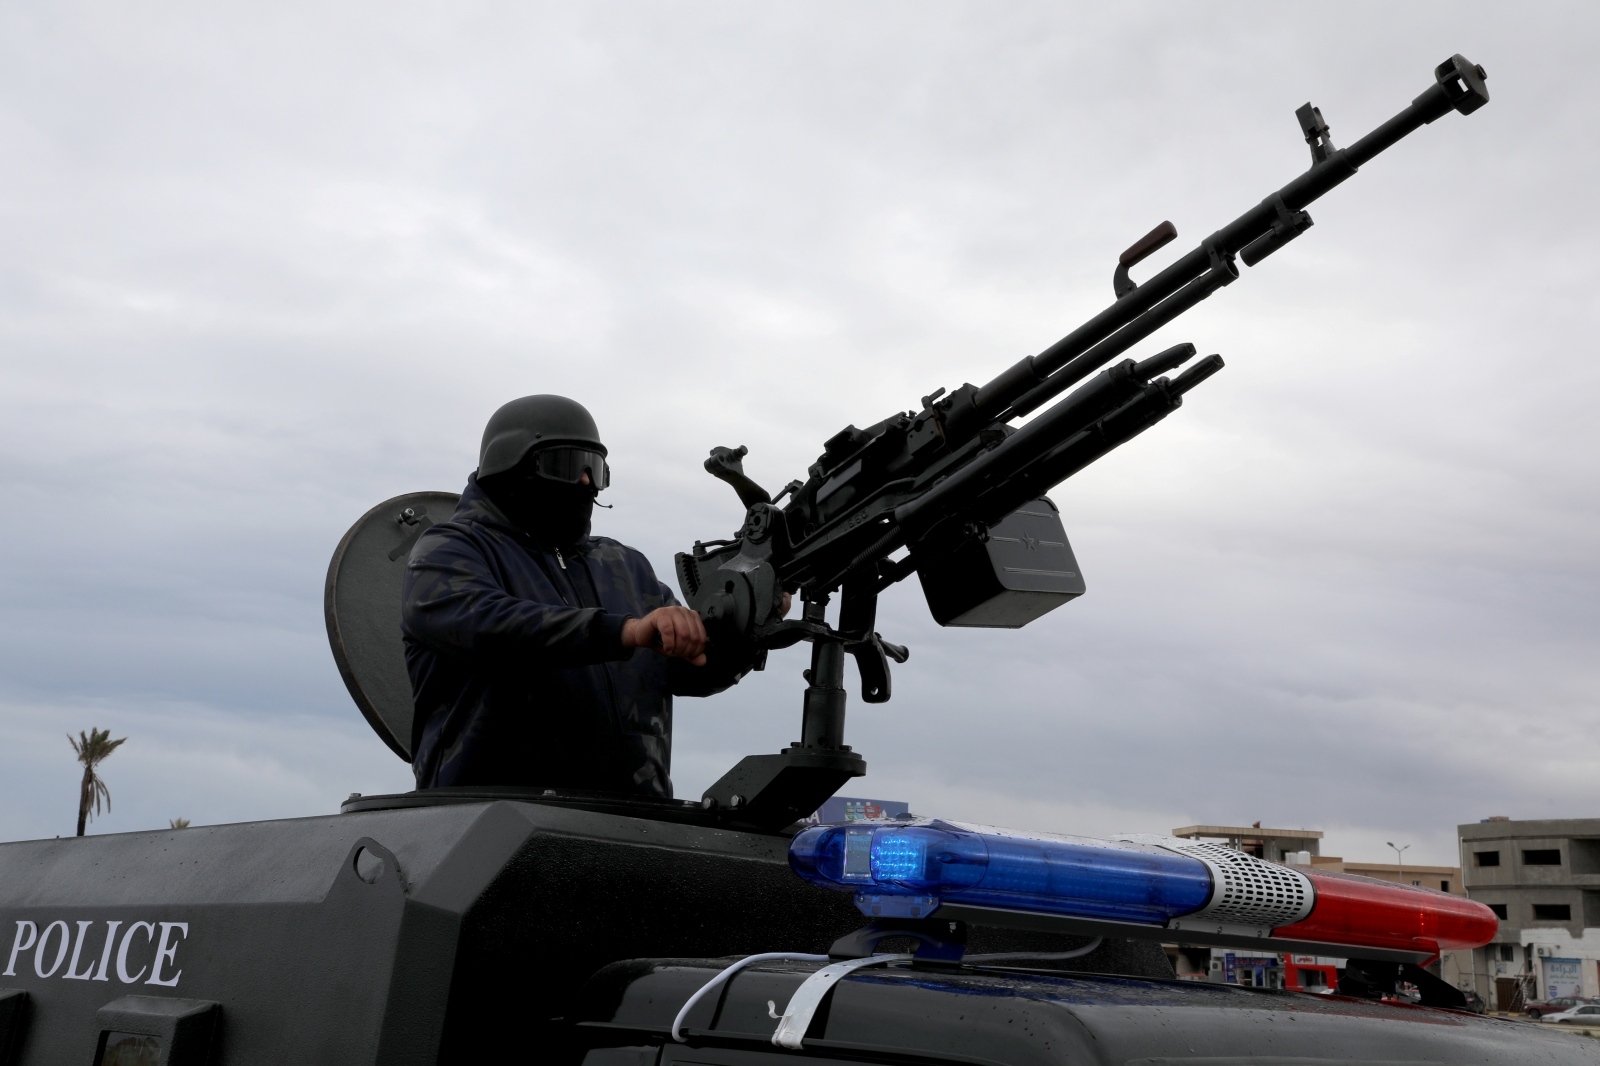 A member of the central security support force holds a weapon during the security deployment in the Tajura neighborhood, east of Tripoli A member of the central security support force holds a weapon during the security deployment in the Tajura neighborhood, east of Tripoli, Libya December 30, 2019.  REUTERS/Ismail Zitouny ISMAIL ZITOUNY